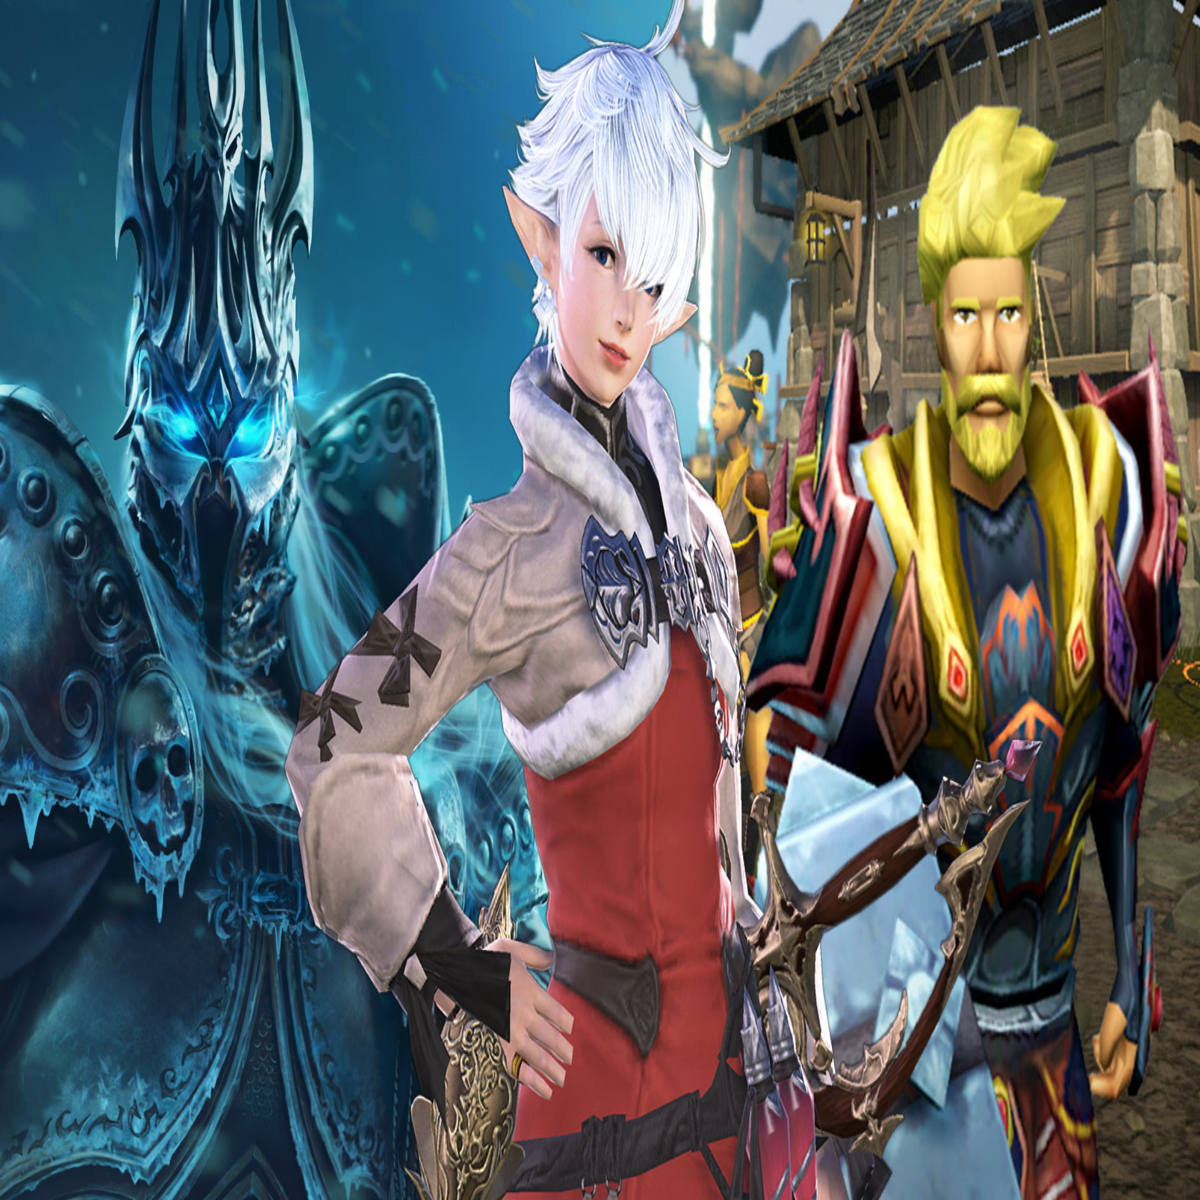 5 Of The Best Free MMOs For Roleplaying - Gaming Adept